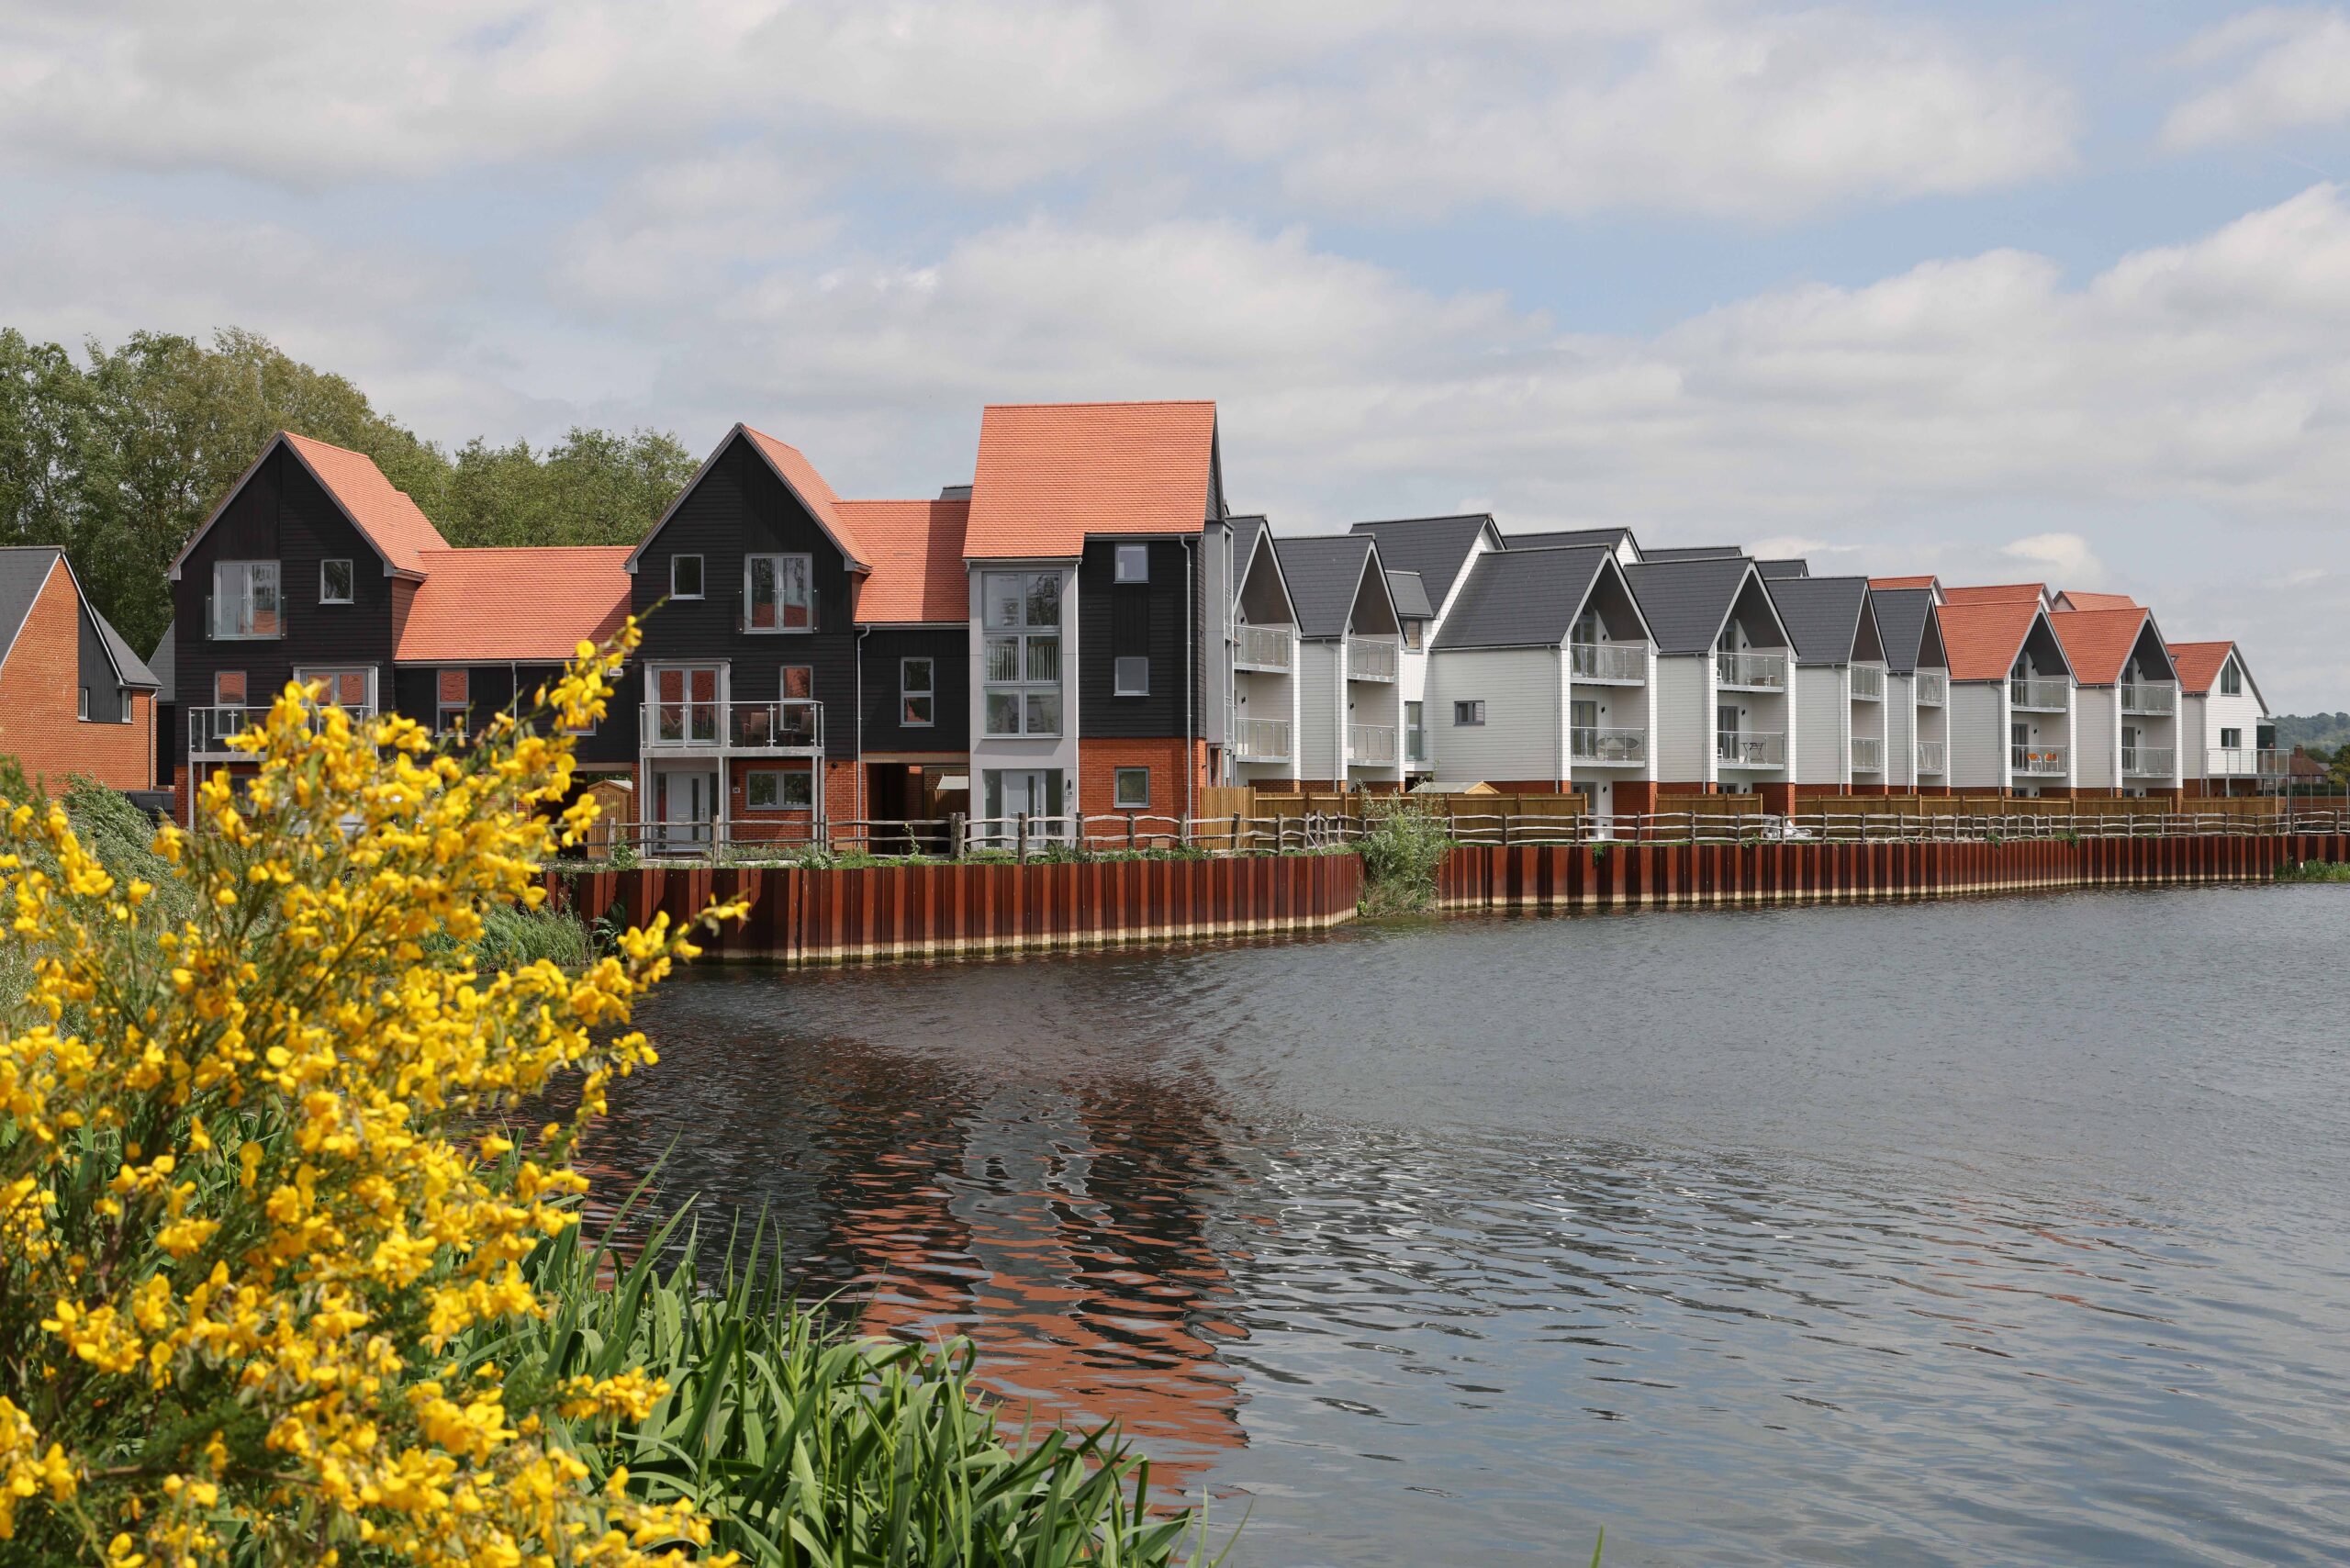 Conningbrook Lakeside Living Open Day – Join us Saturday 26th August 10-5pm